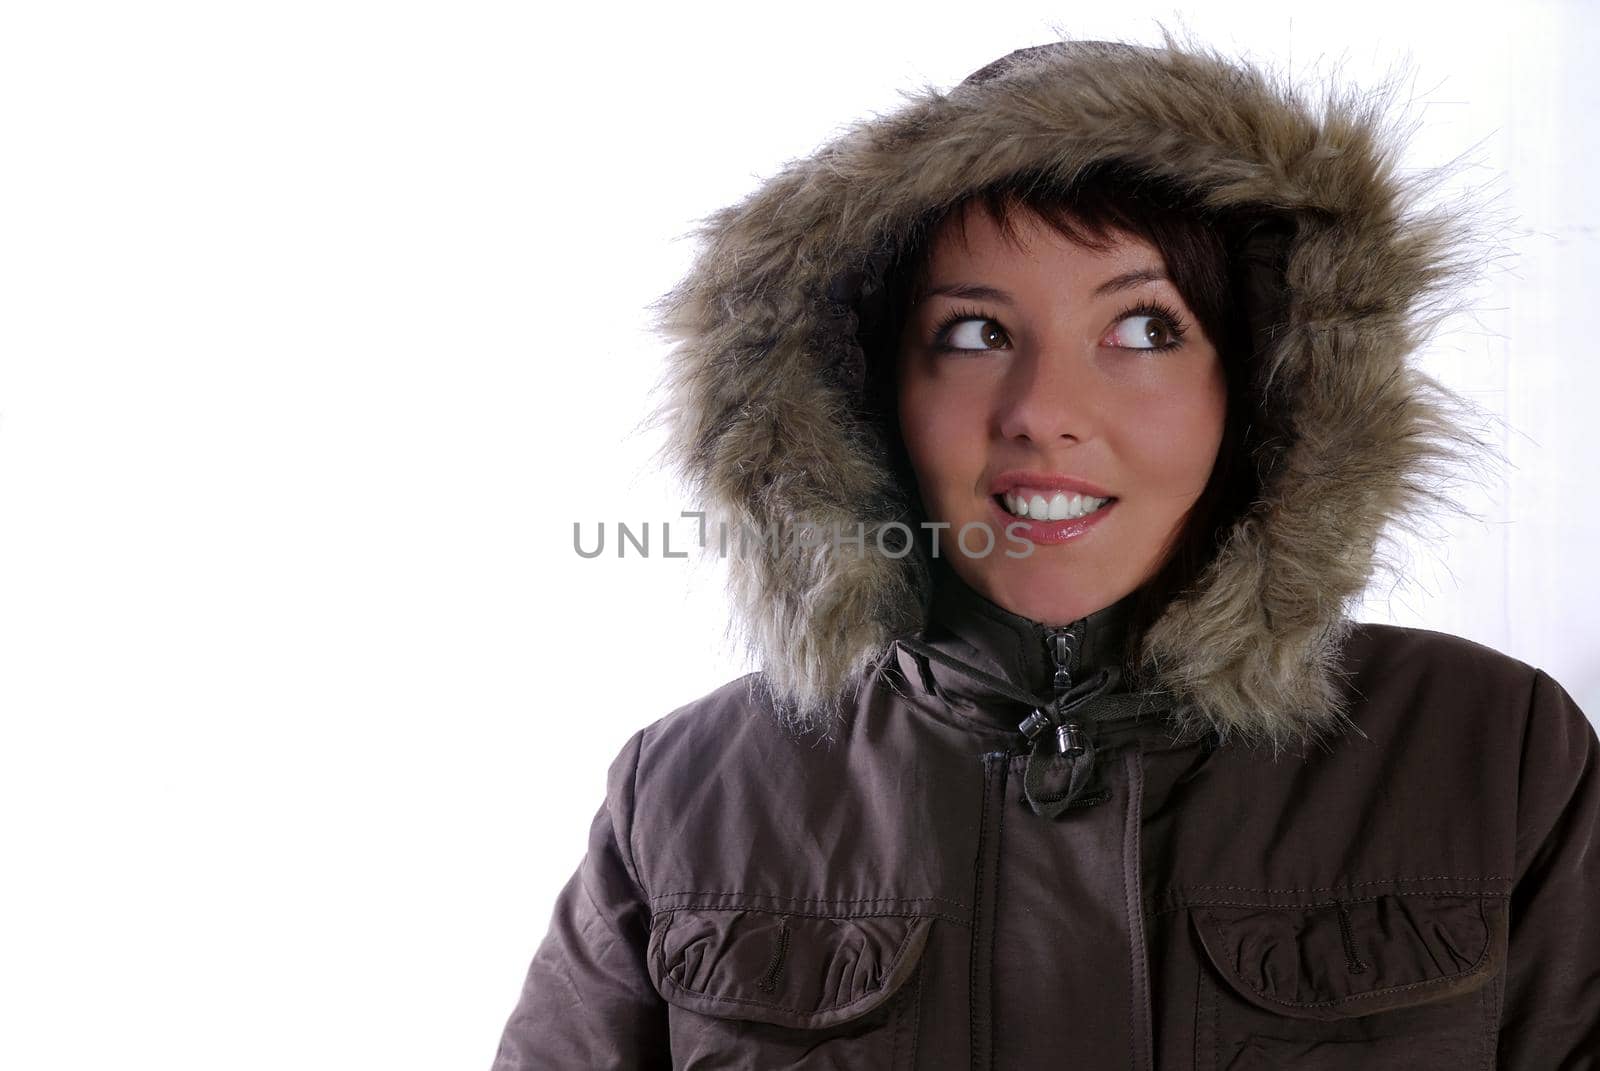 Cute young woman smiling in winter jacket